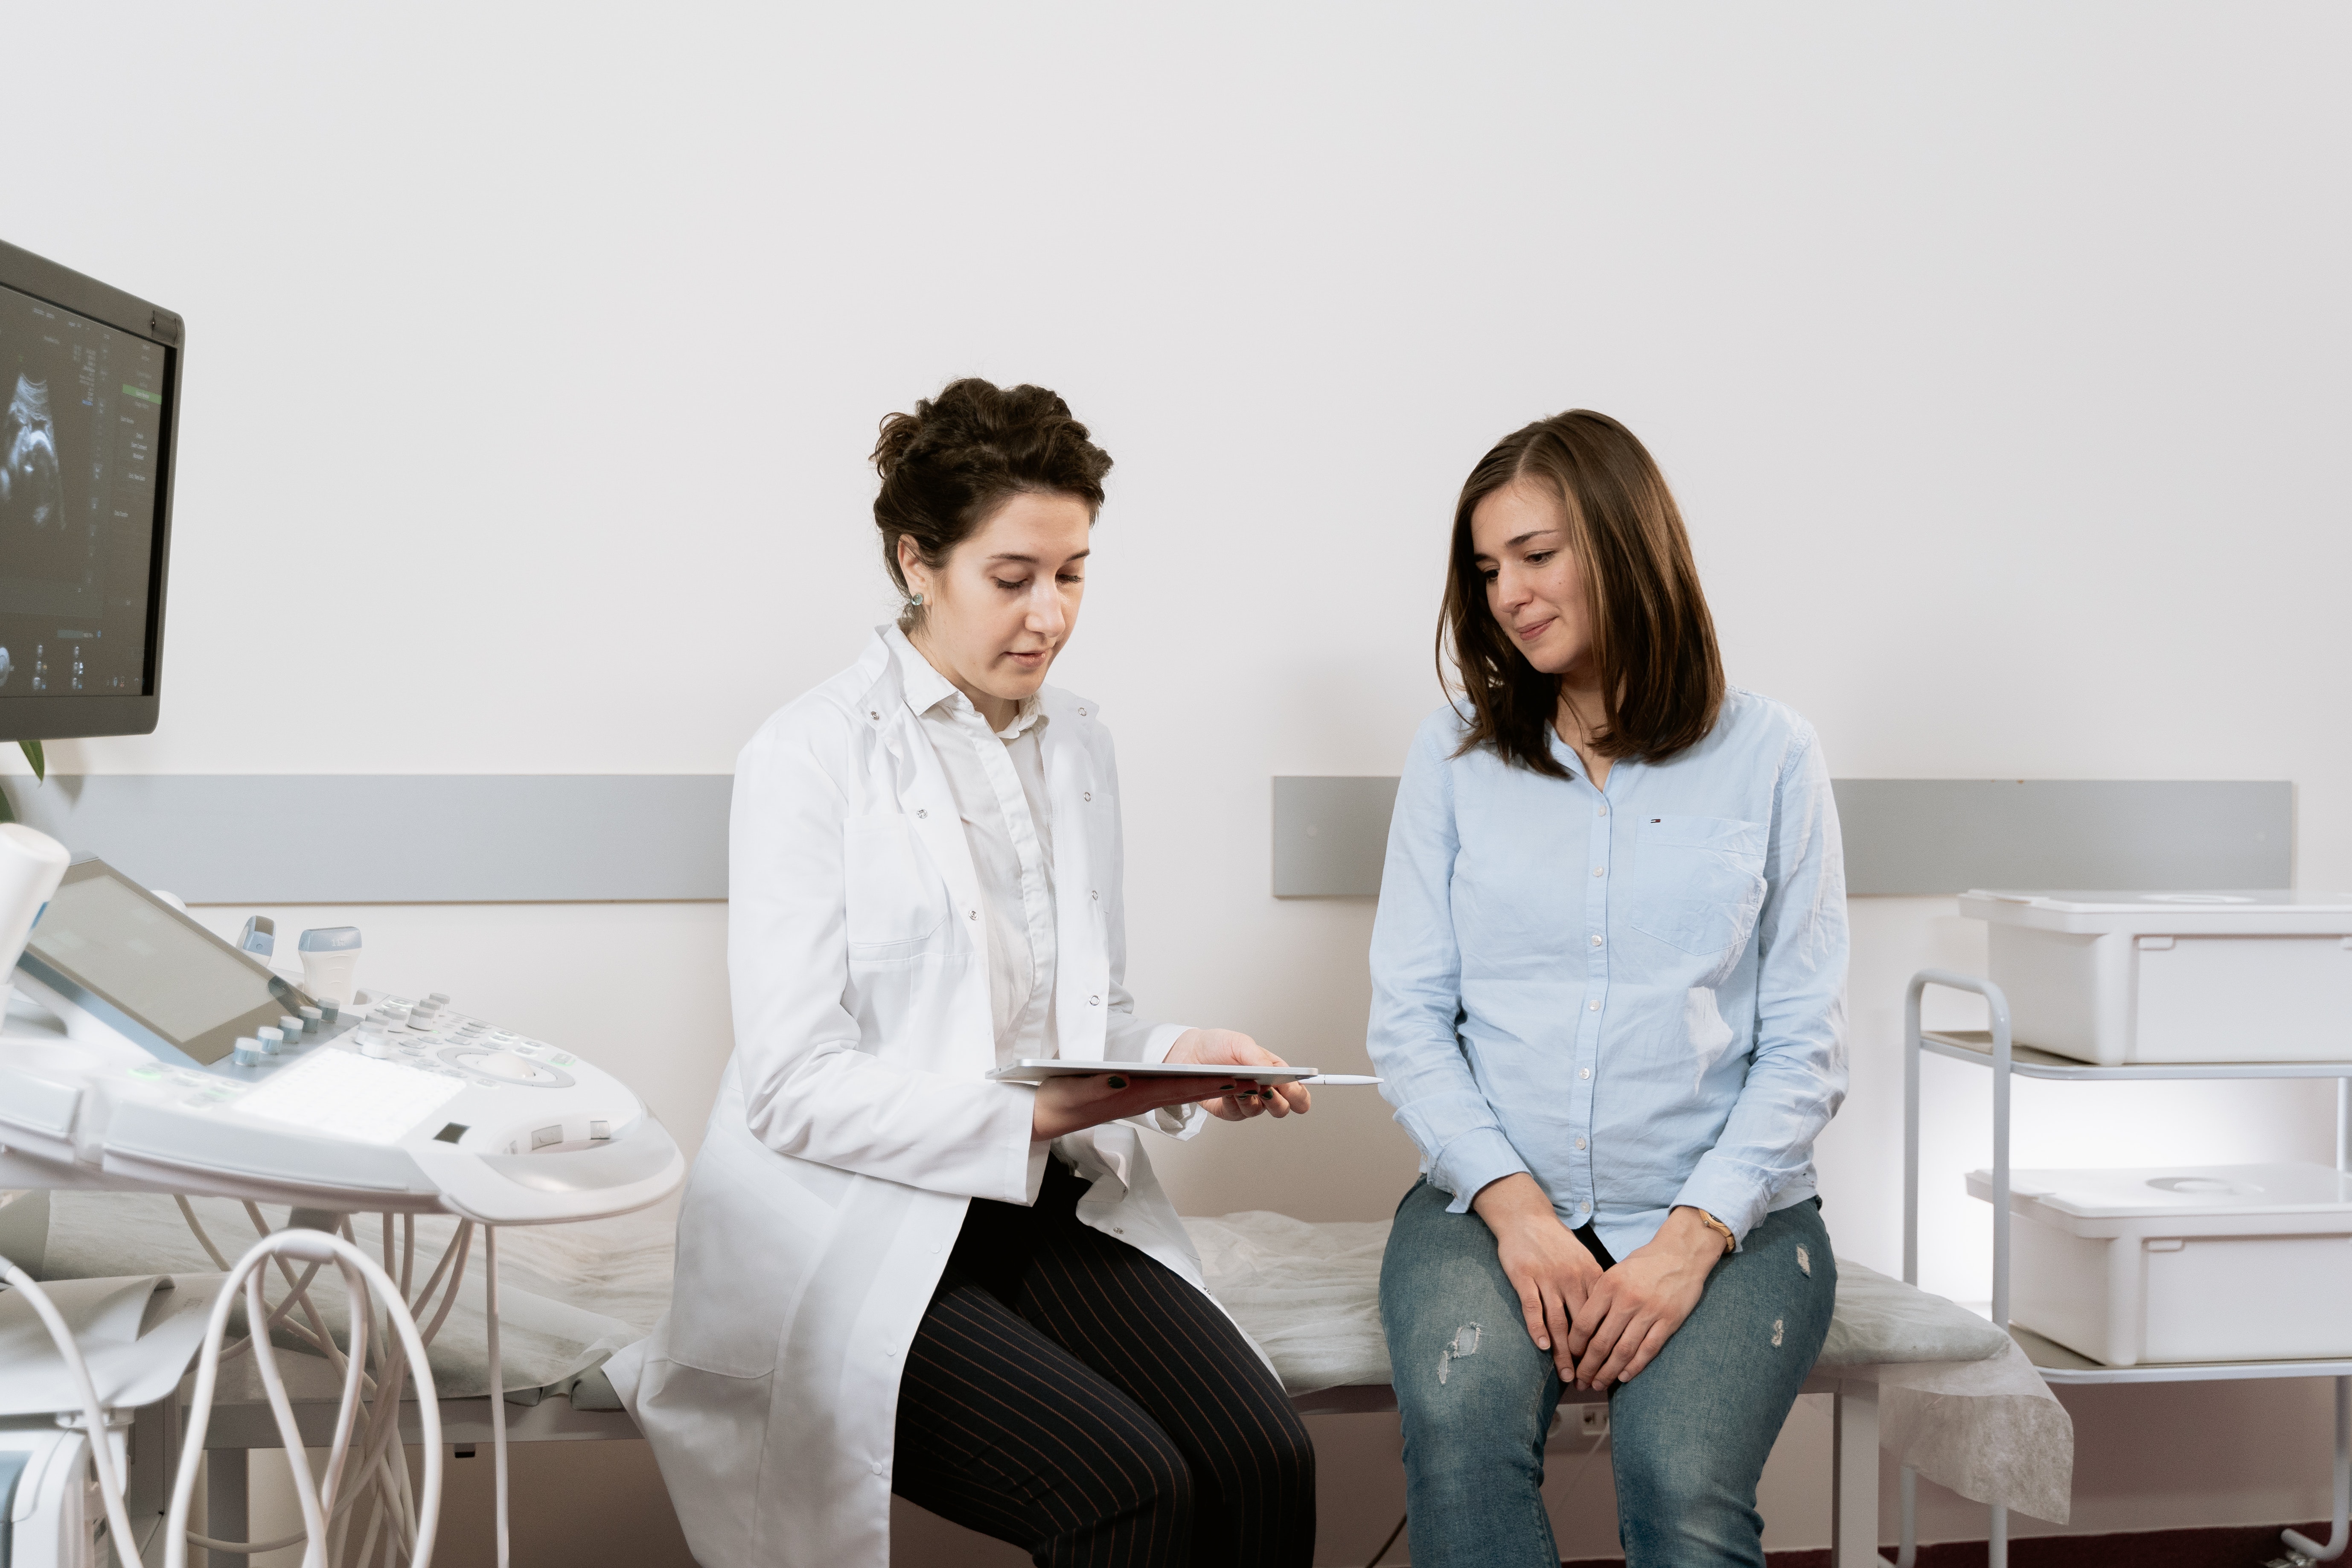 A pregnant woman consulting with her doctor